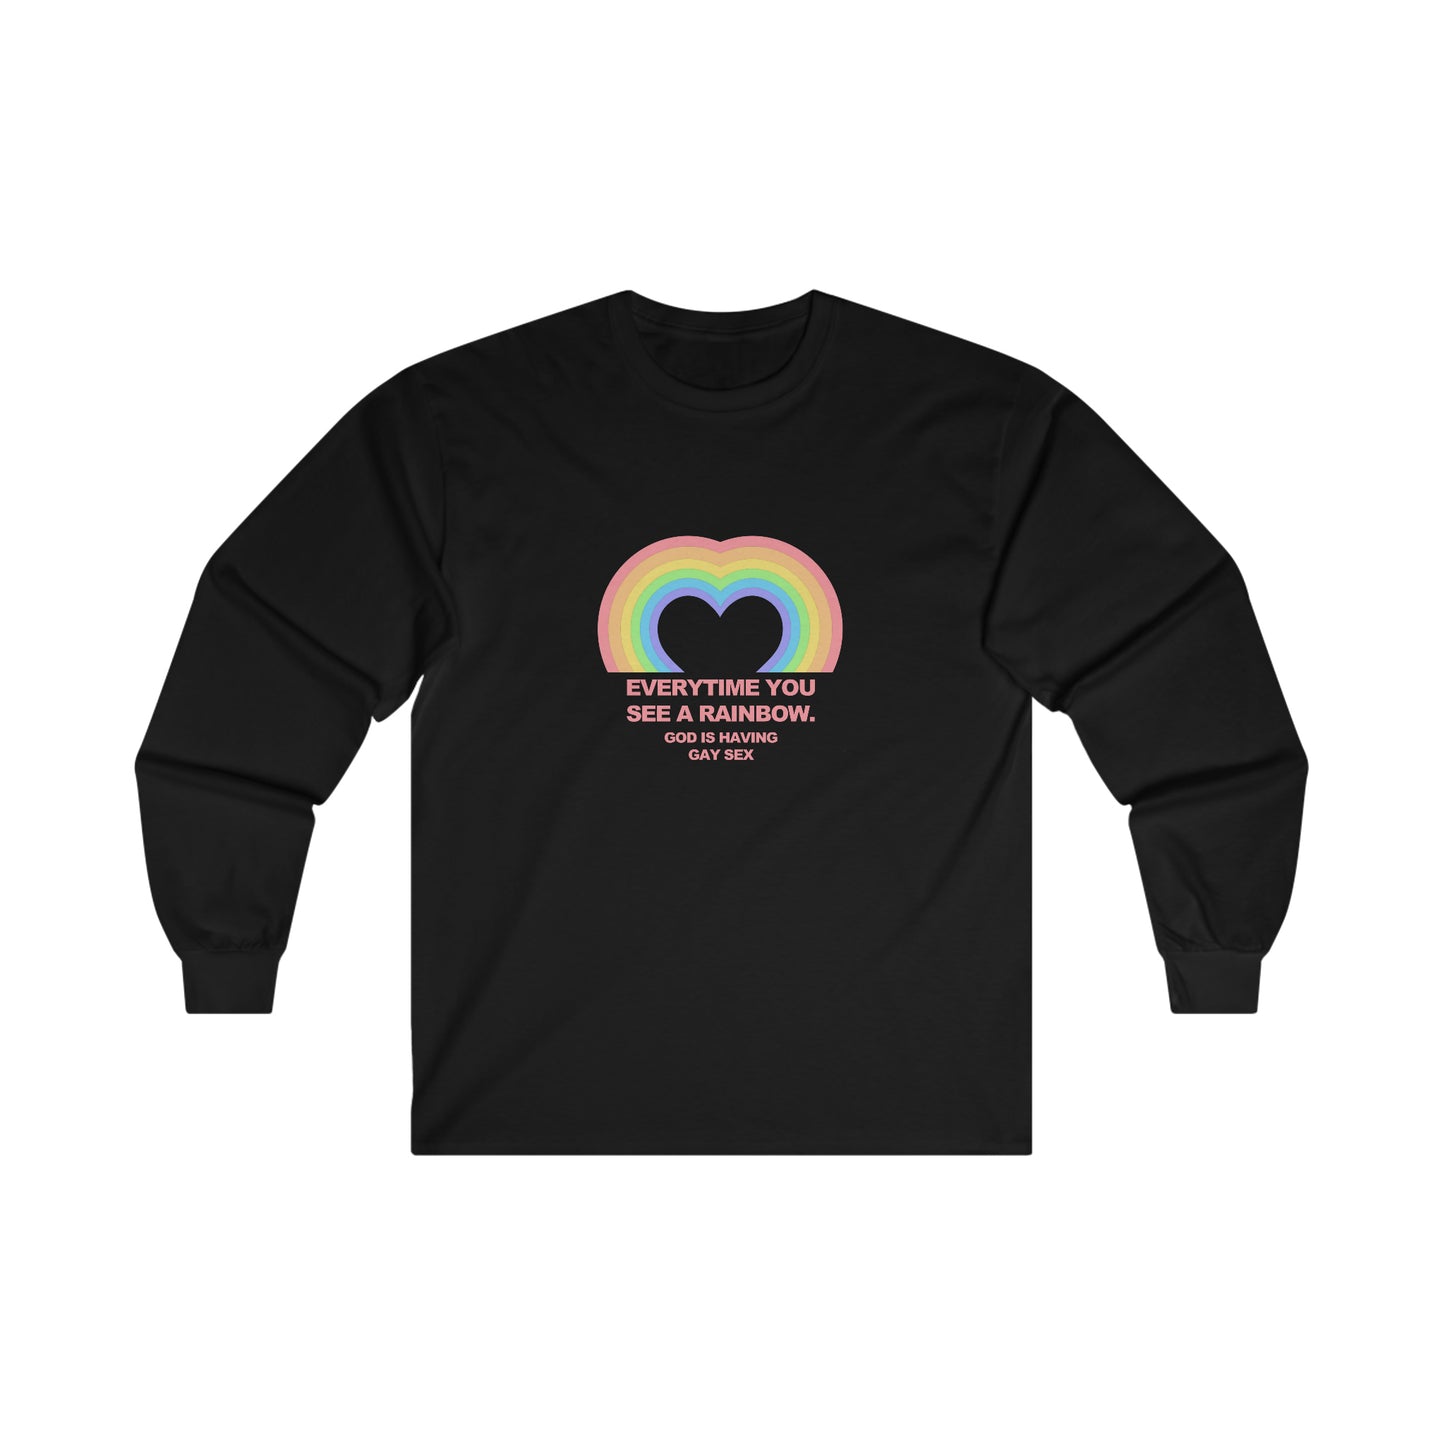 Everytime you see a rainbow, god is having gay sex Long Sleeve T-Shirt